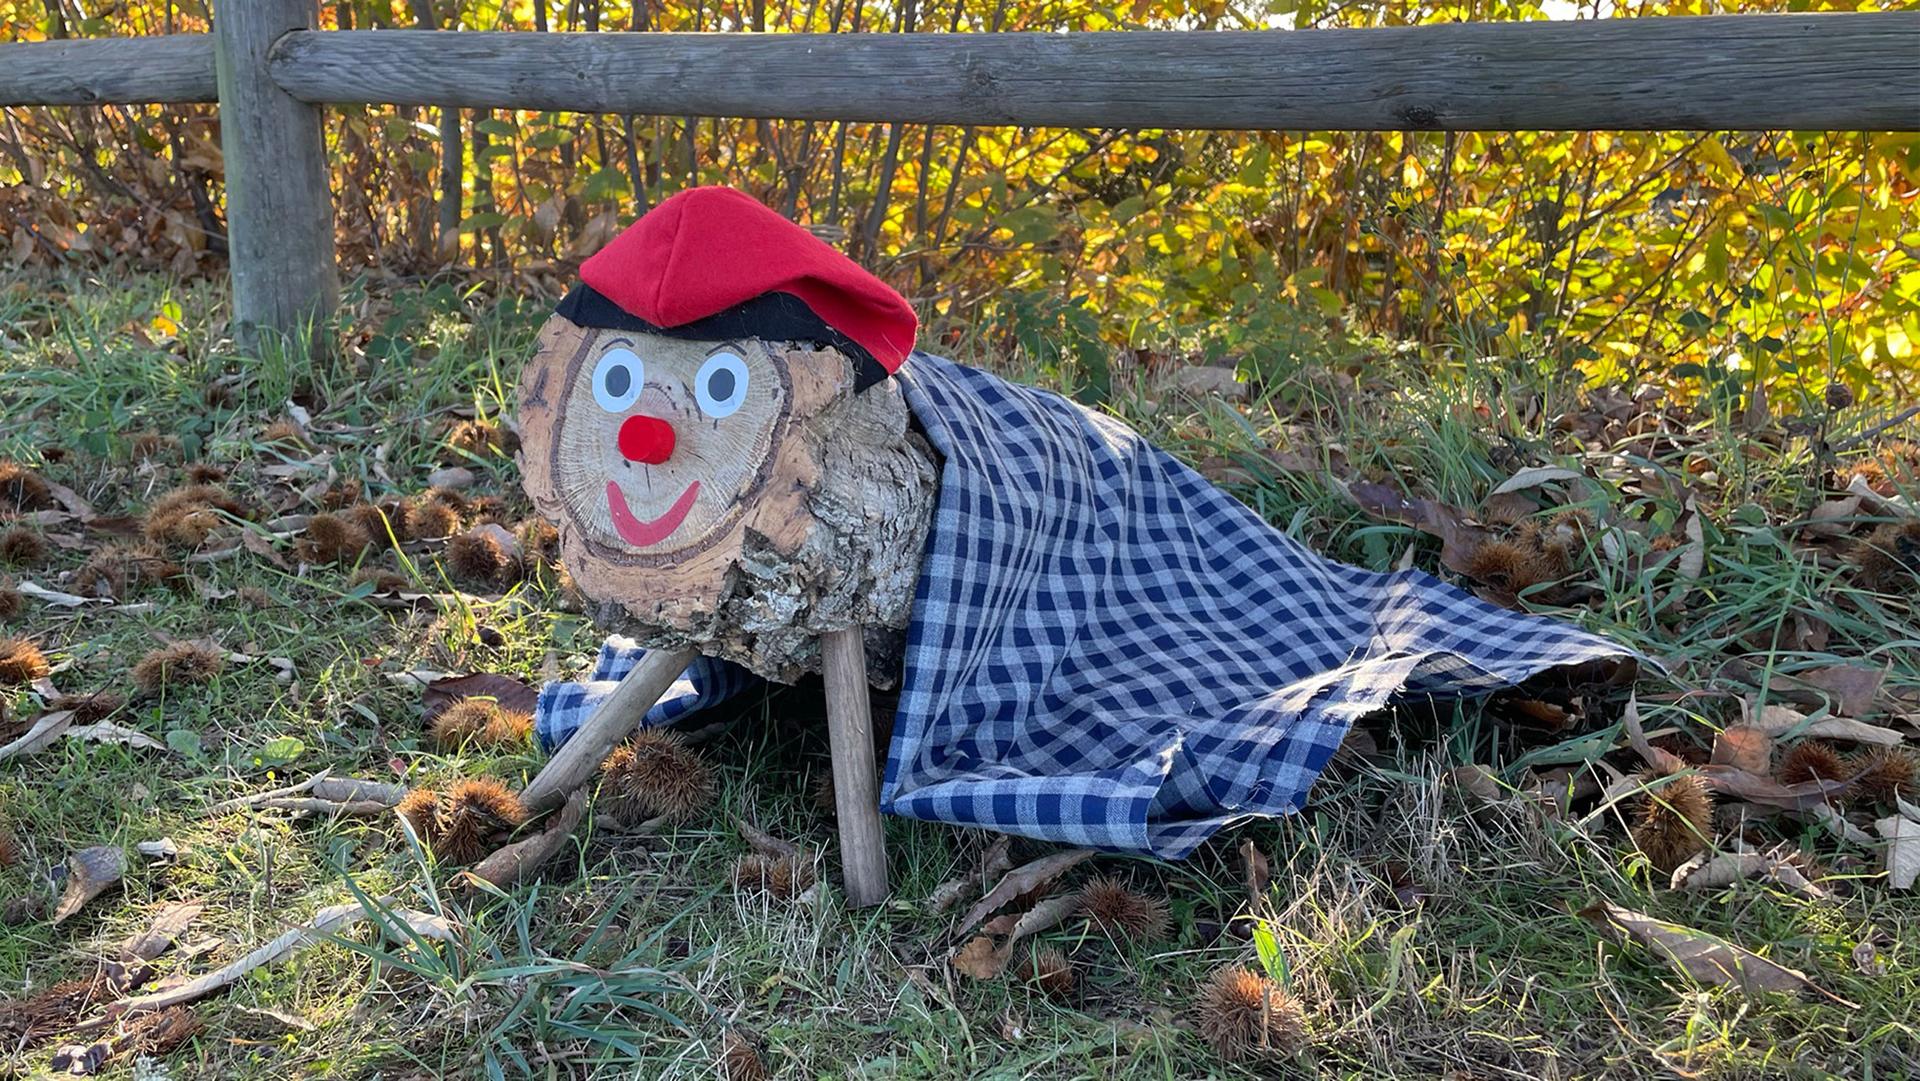 During the month of December, the Tió de Nadal is placed under a blanket and fed every night. On Christmas Eve, he "poops" out presents.